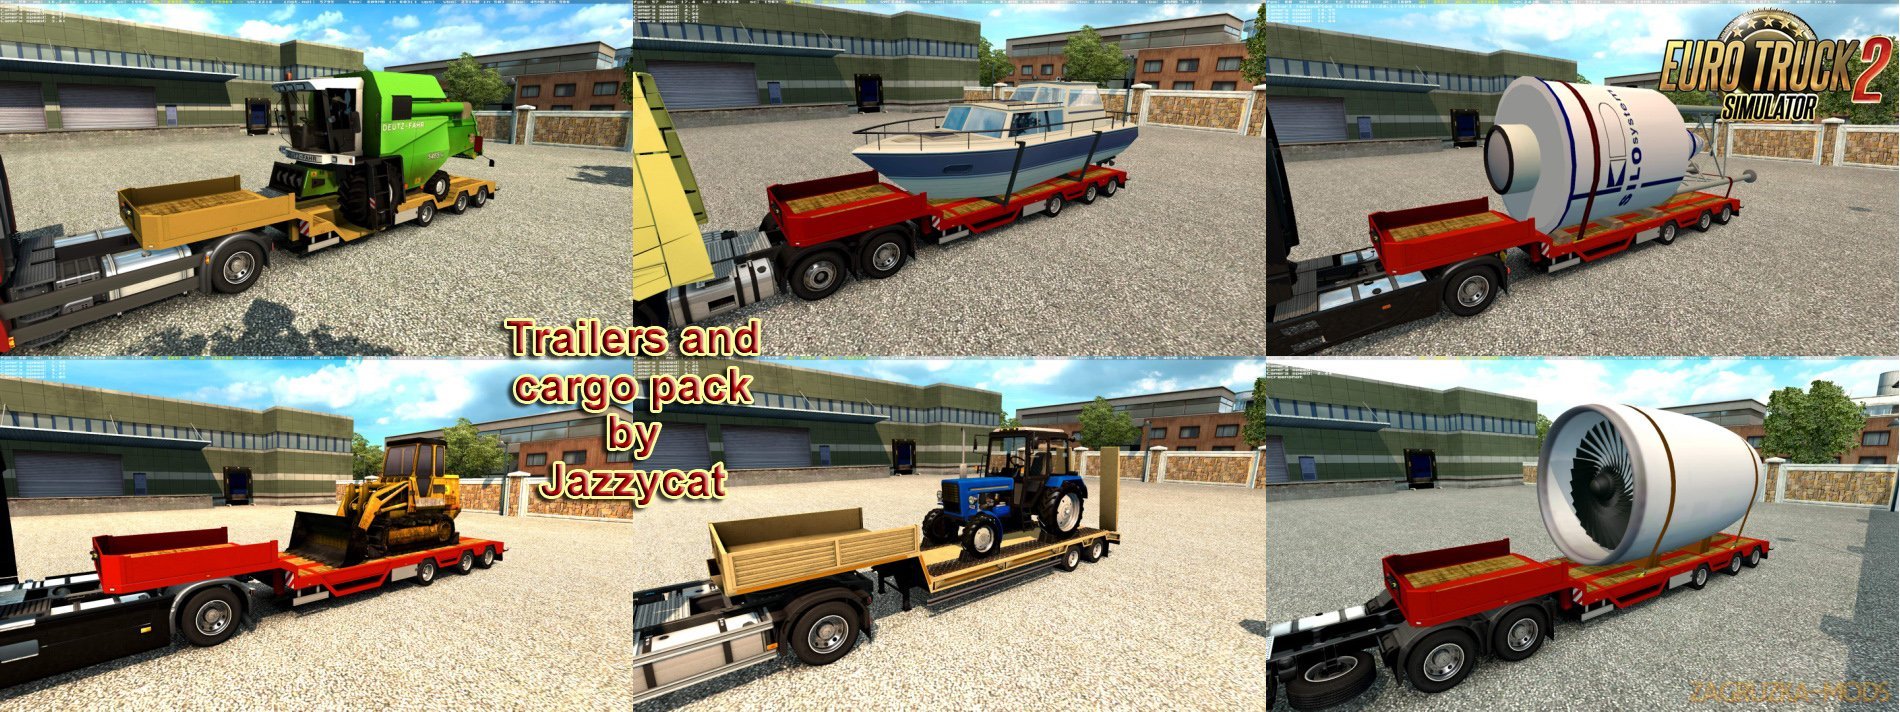 Trailers and Cargo Pack v6.6 by Jazzycat